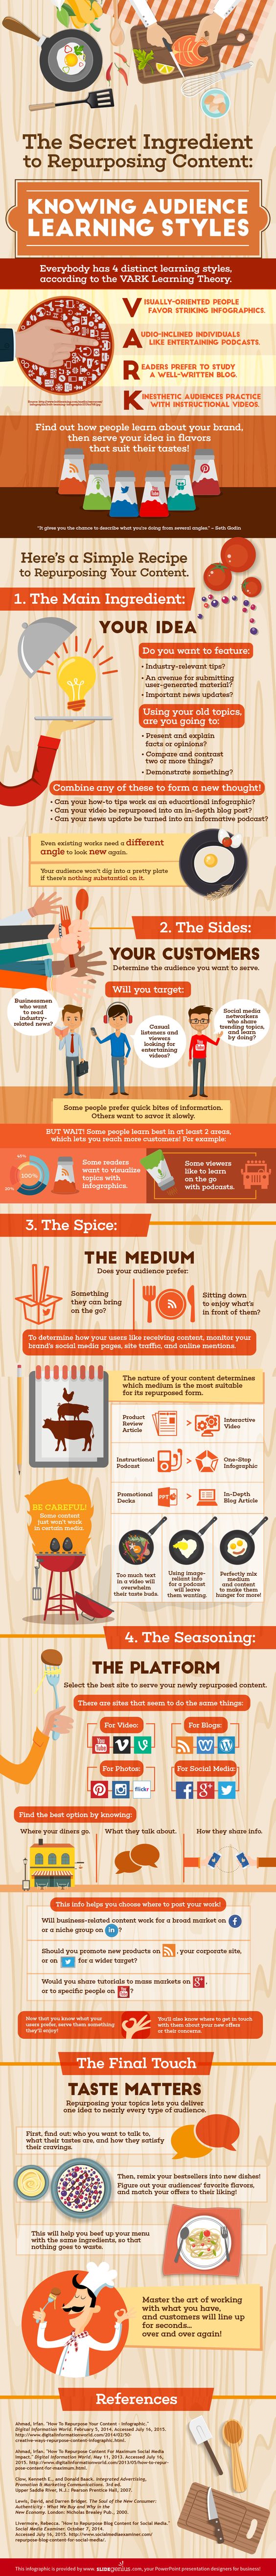 How To Repurpose Content Infographic